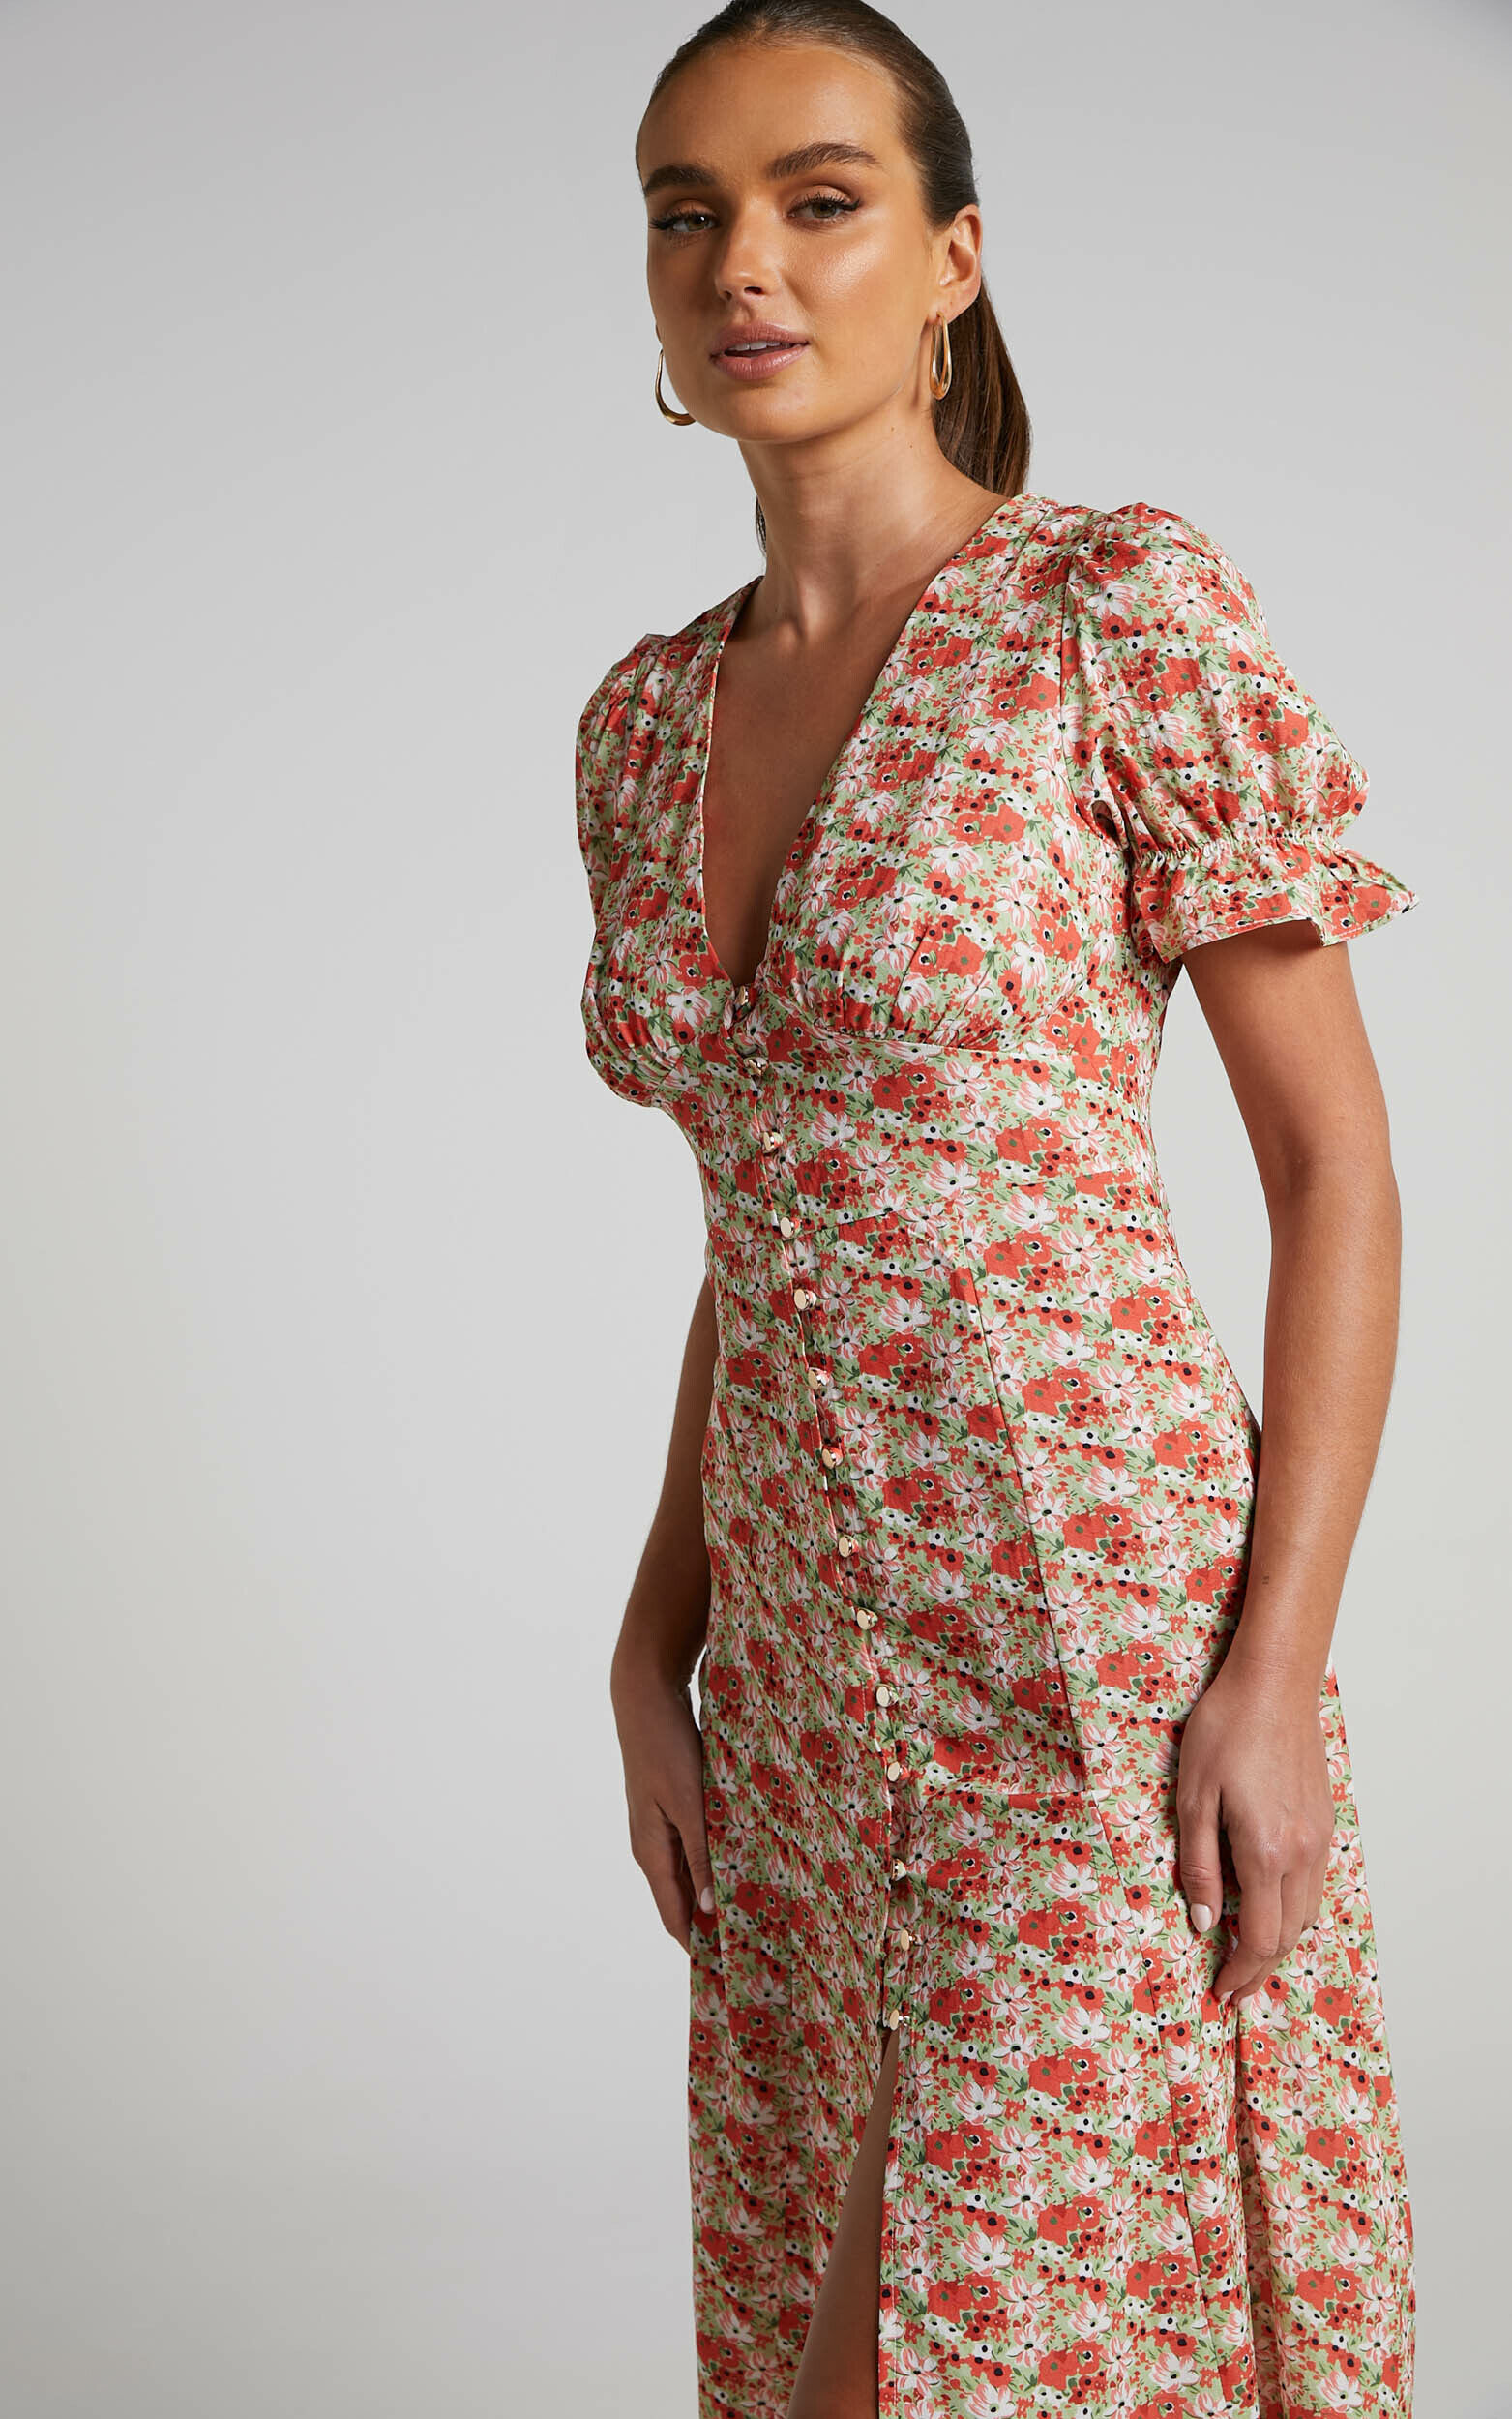 Adalina Maxi Dress - Short Puff Sleeve Button Down Dress in Pink Floral - 04, PNK1, super-hi-res image number null